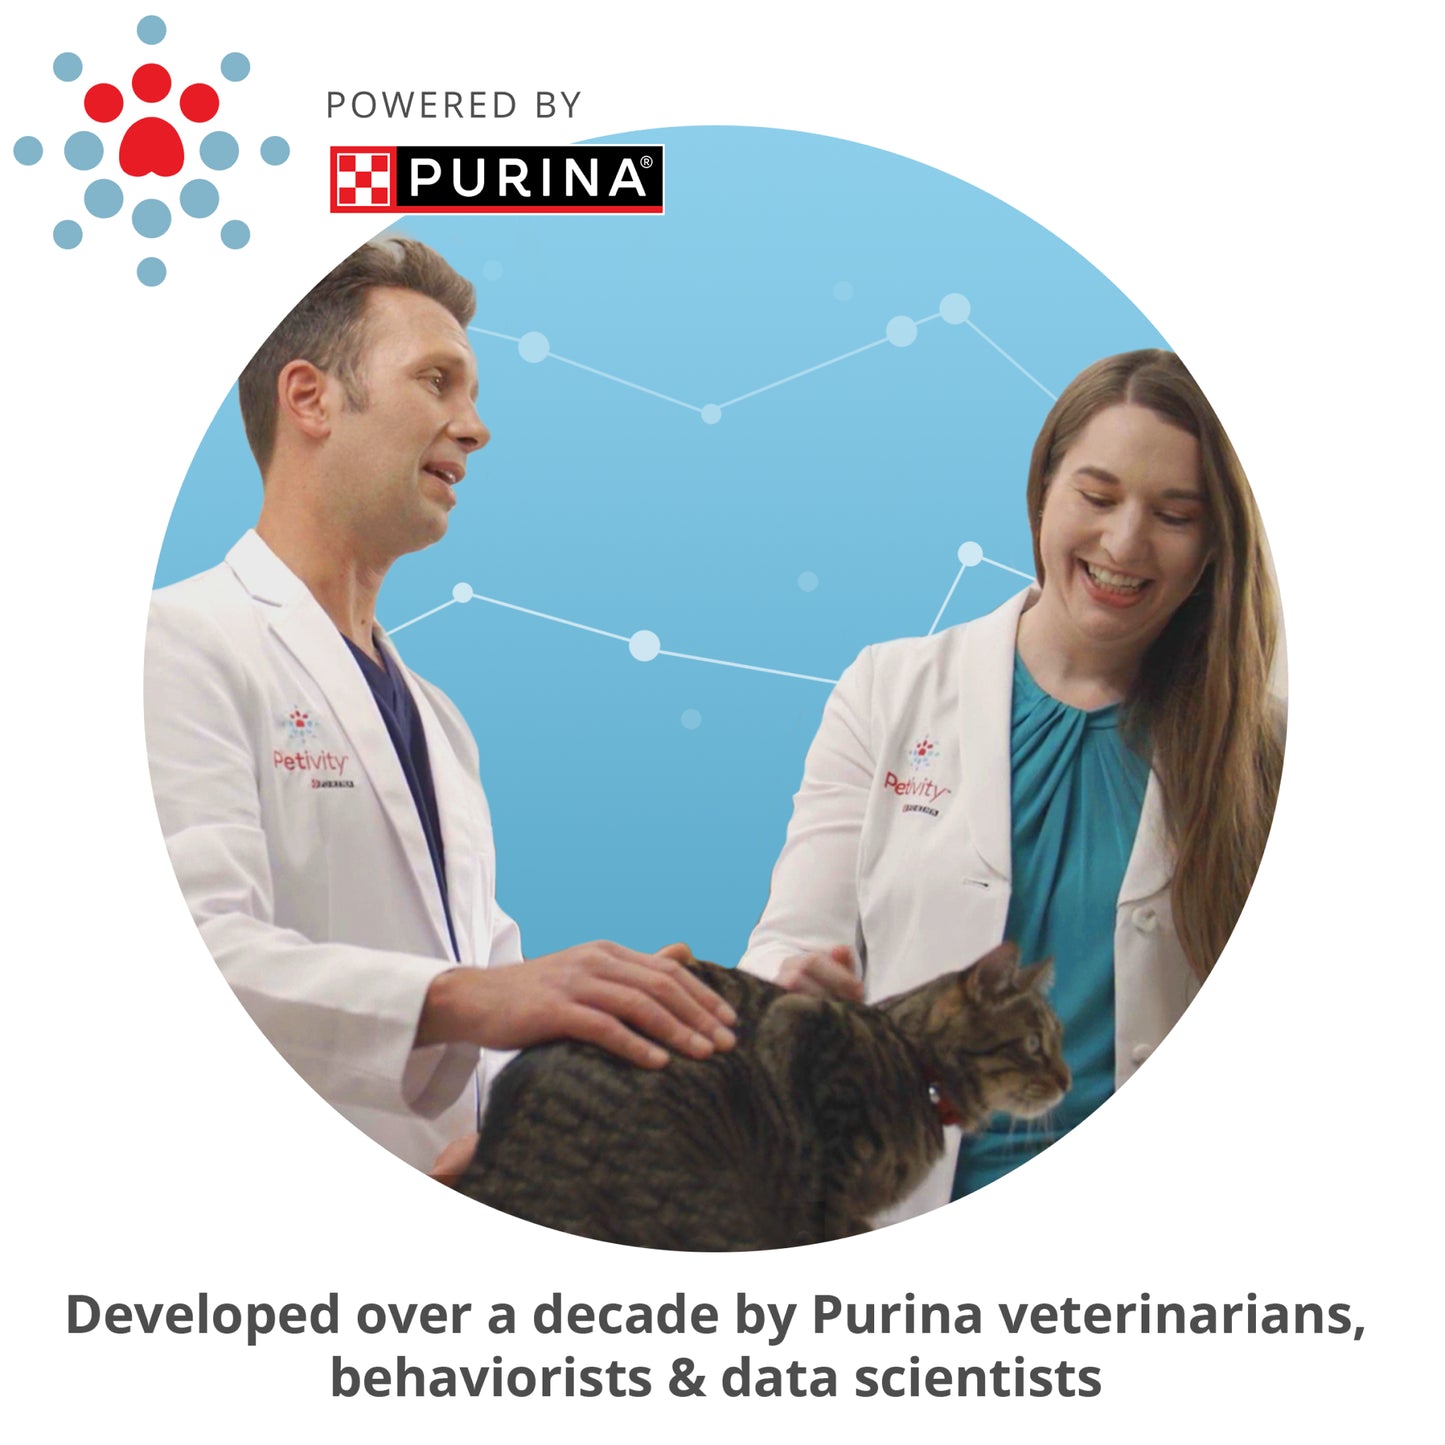 Developed over a decade by Purina vets, behaviorists and data scientists